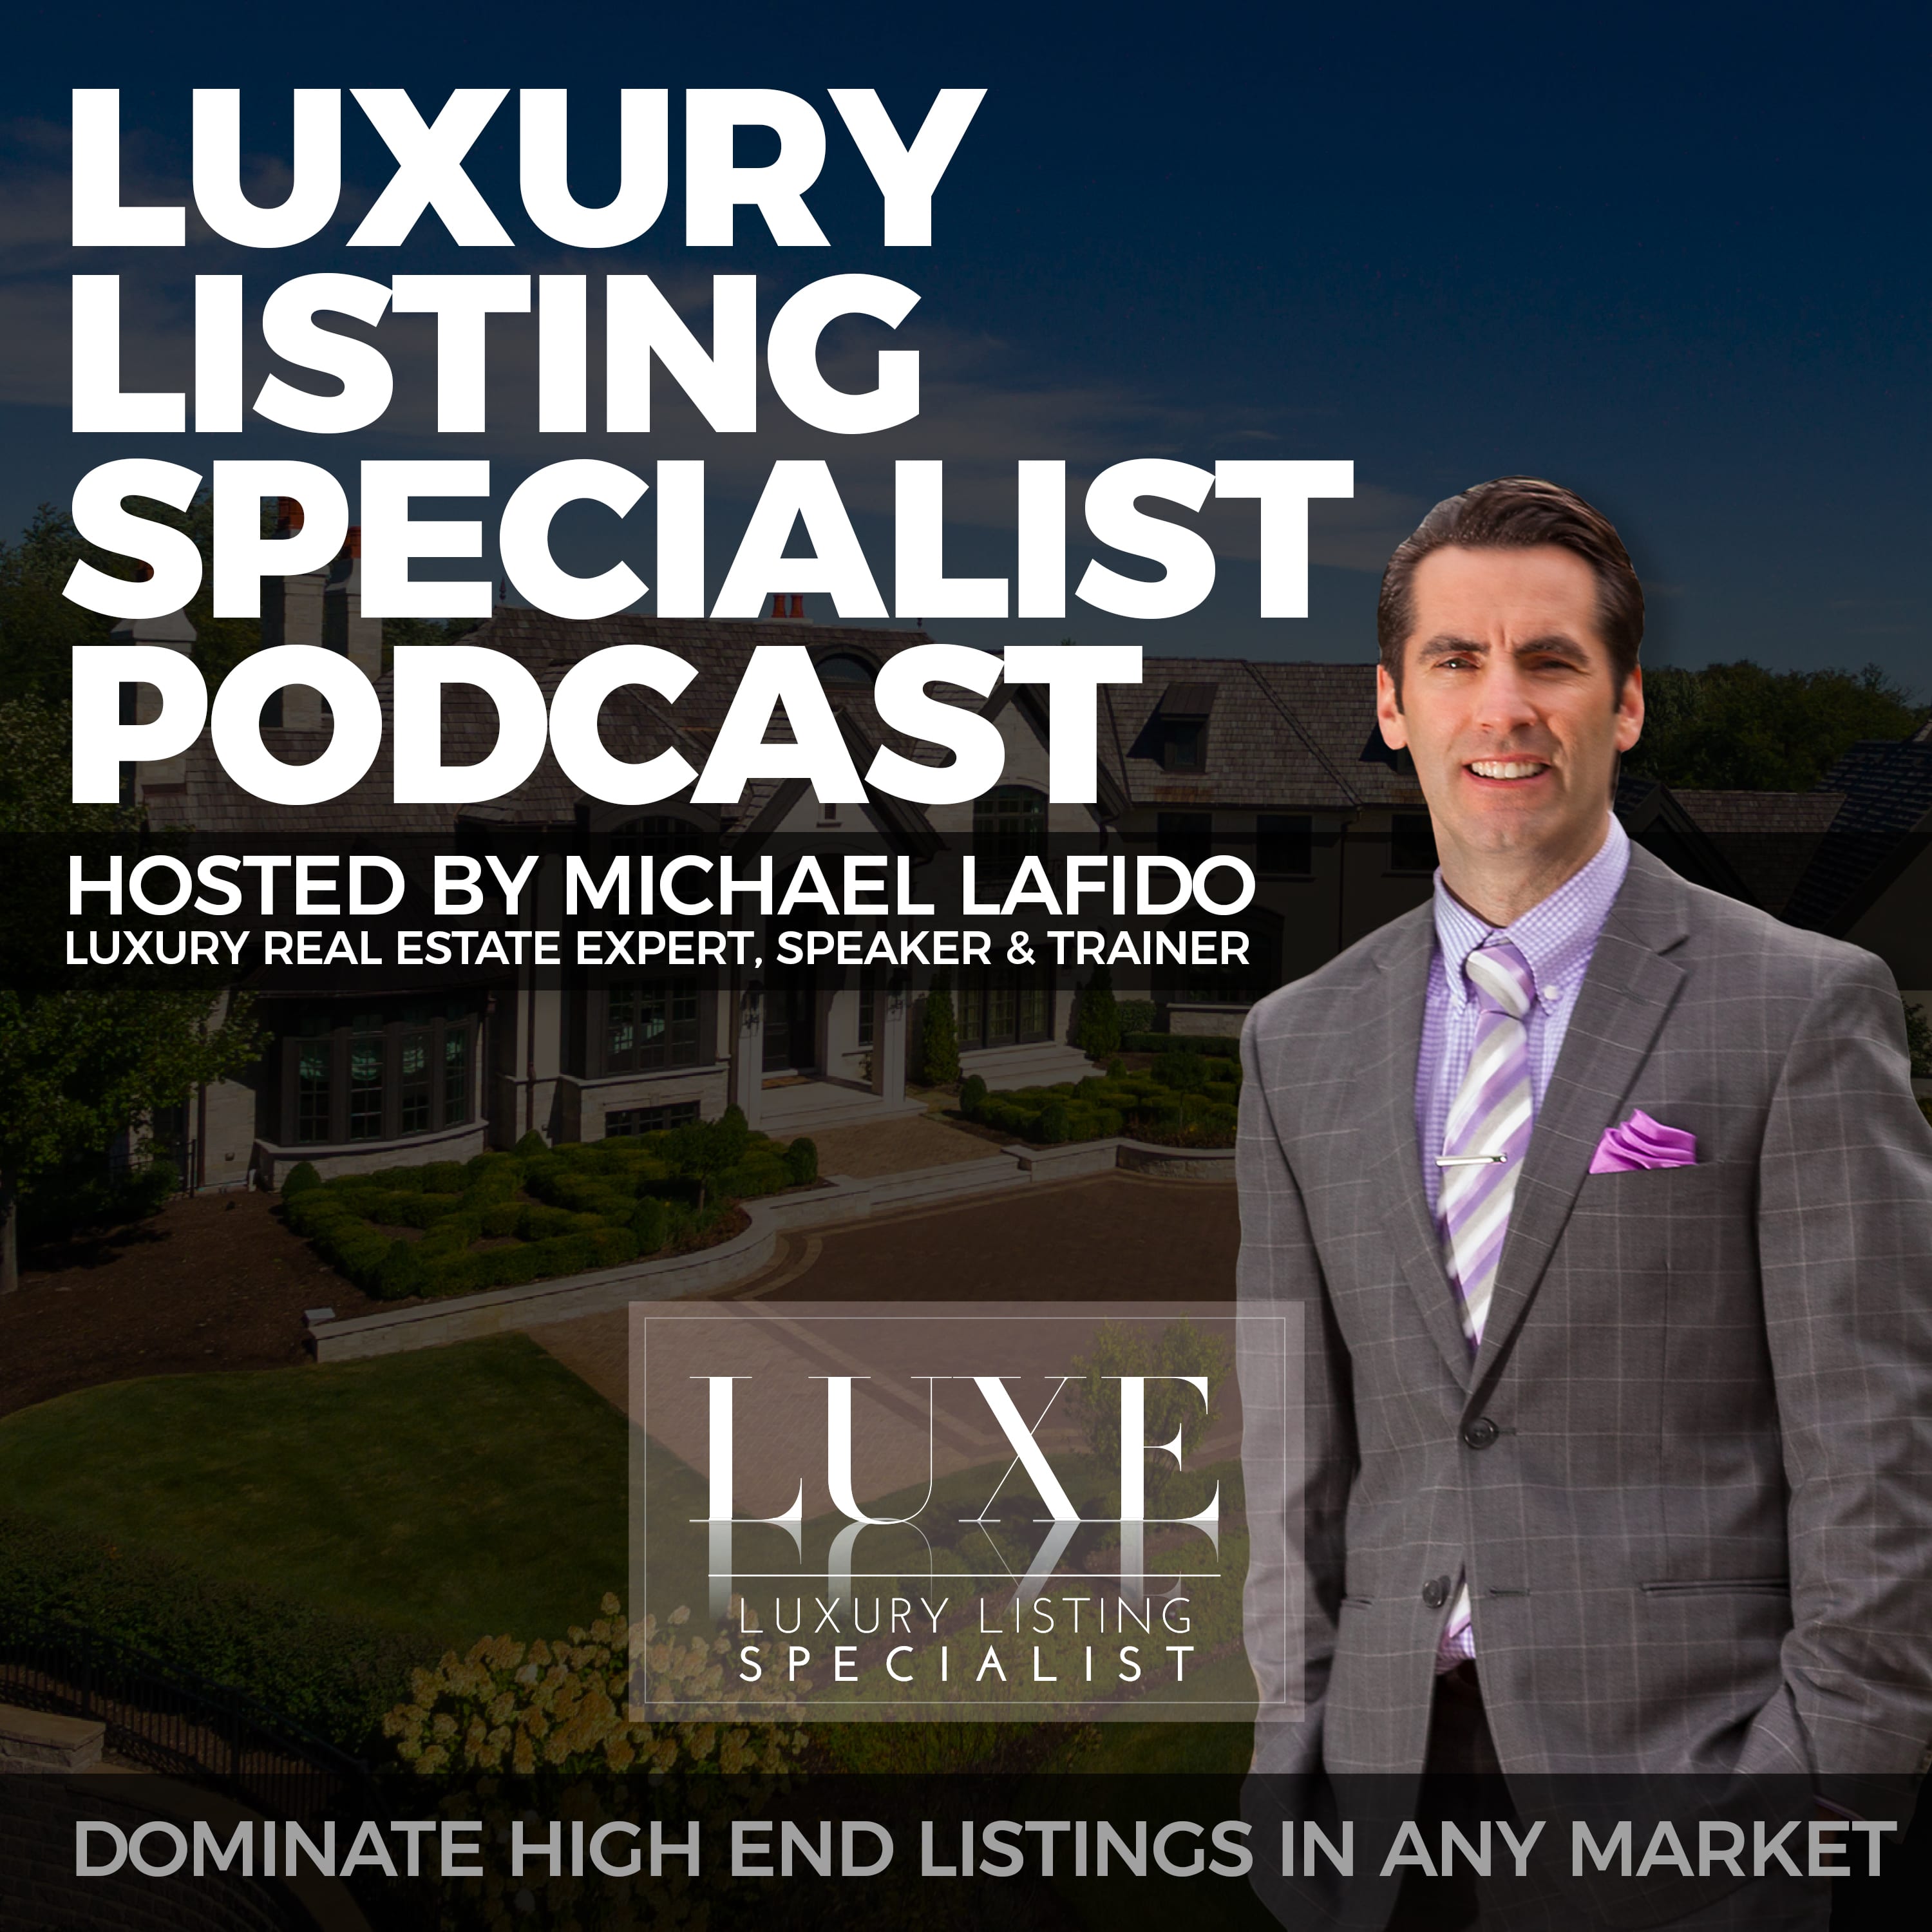 Using Direct Response Marketing to Target Luxury Sellers w/Dean Jackson